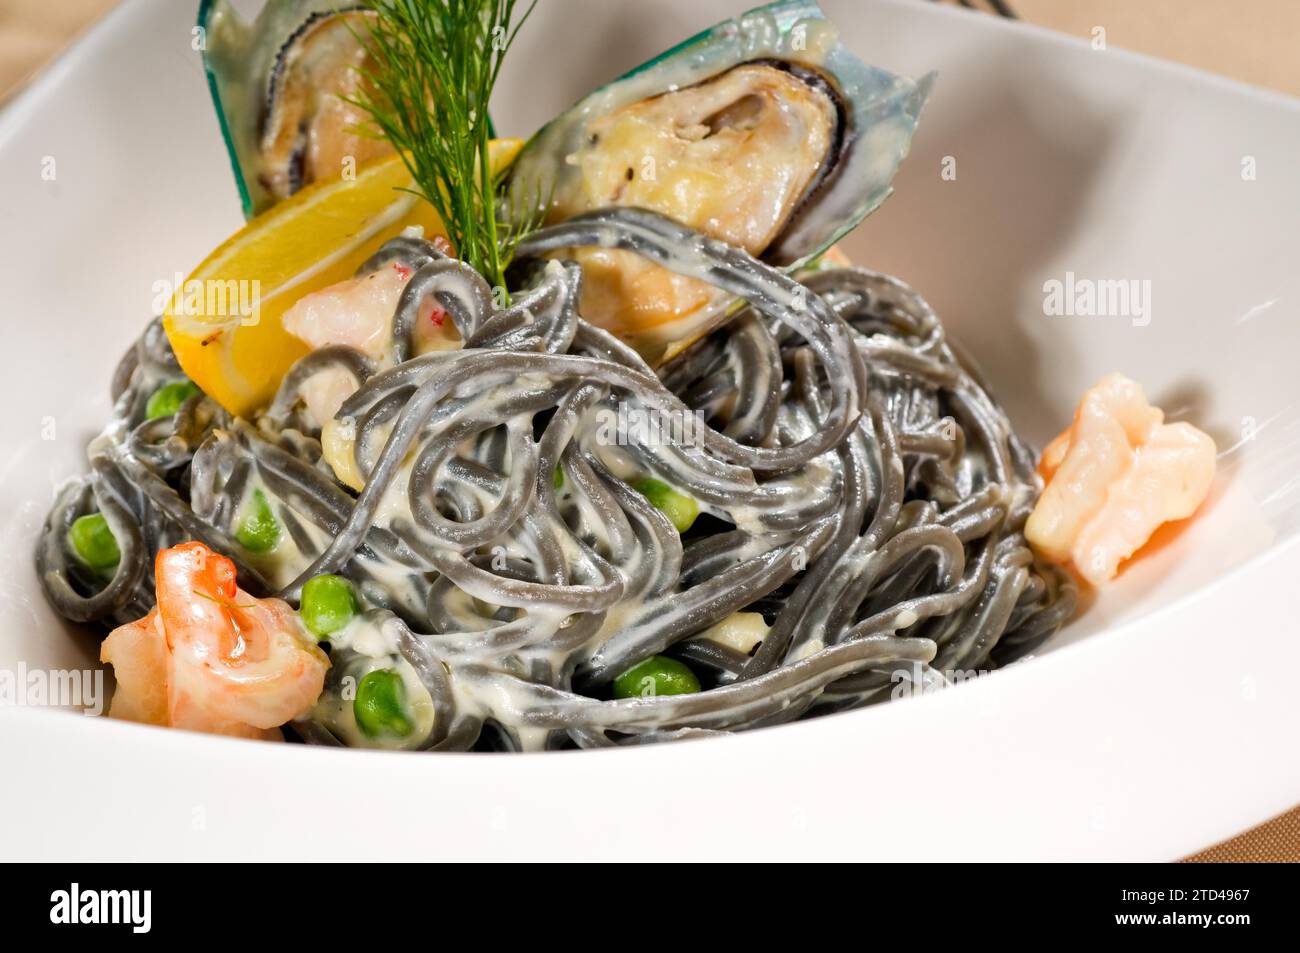 Fresh seafood black squid ink coulored spaghetti pasta tipycal italian food, food photography Stock Photo